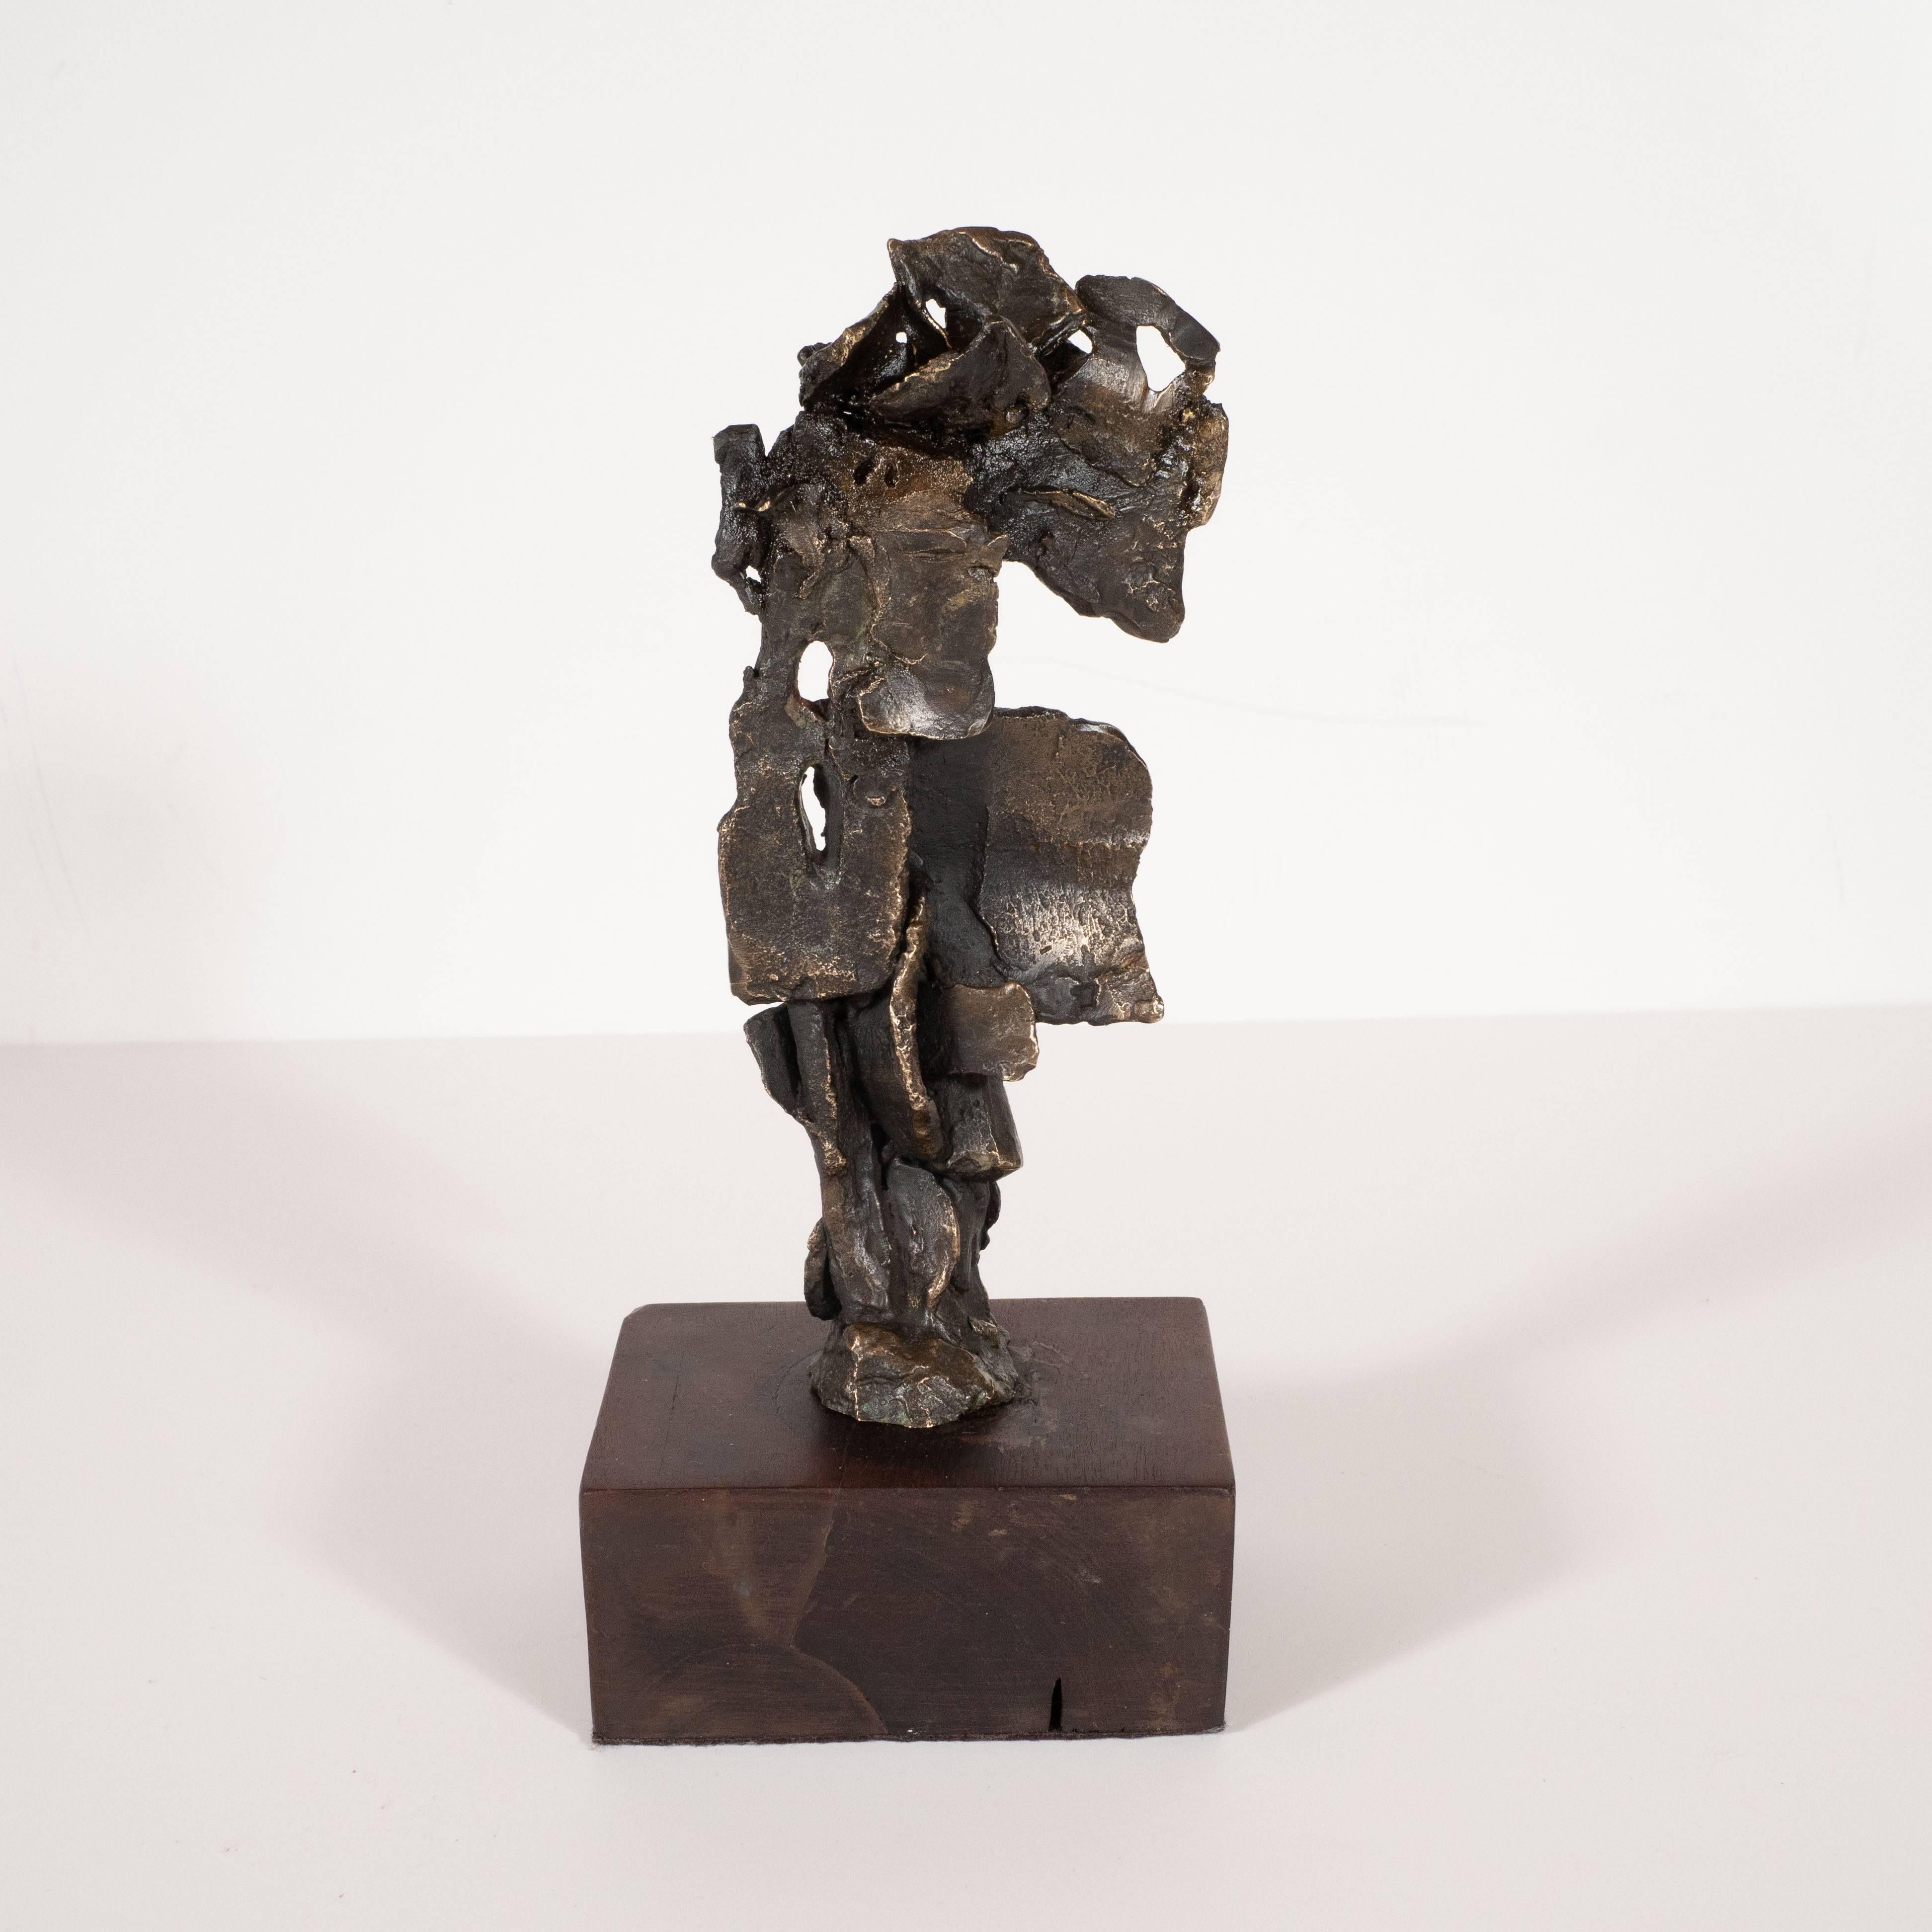 This sophisticated abstract bronze sculpture was realized in the United States, circa 1960. It features abundance of adjoined organic bronze forms resting on a rectangular original walnut base. With its totemic silhouette, it suggests an abstracted